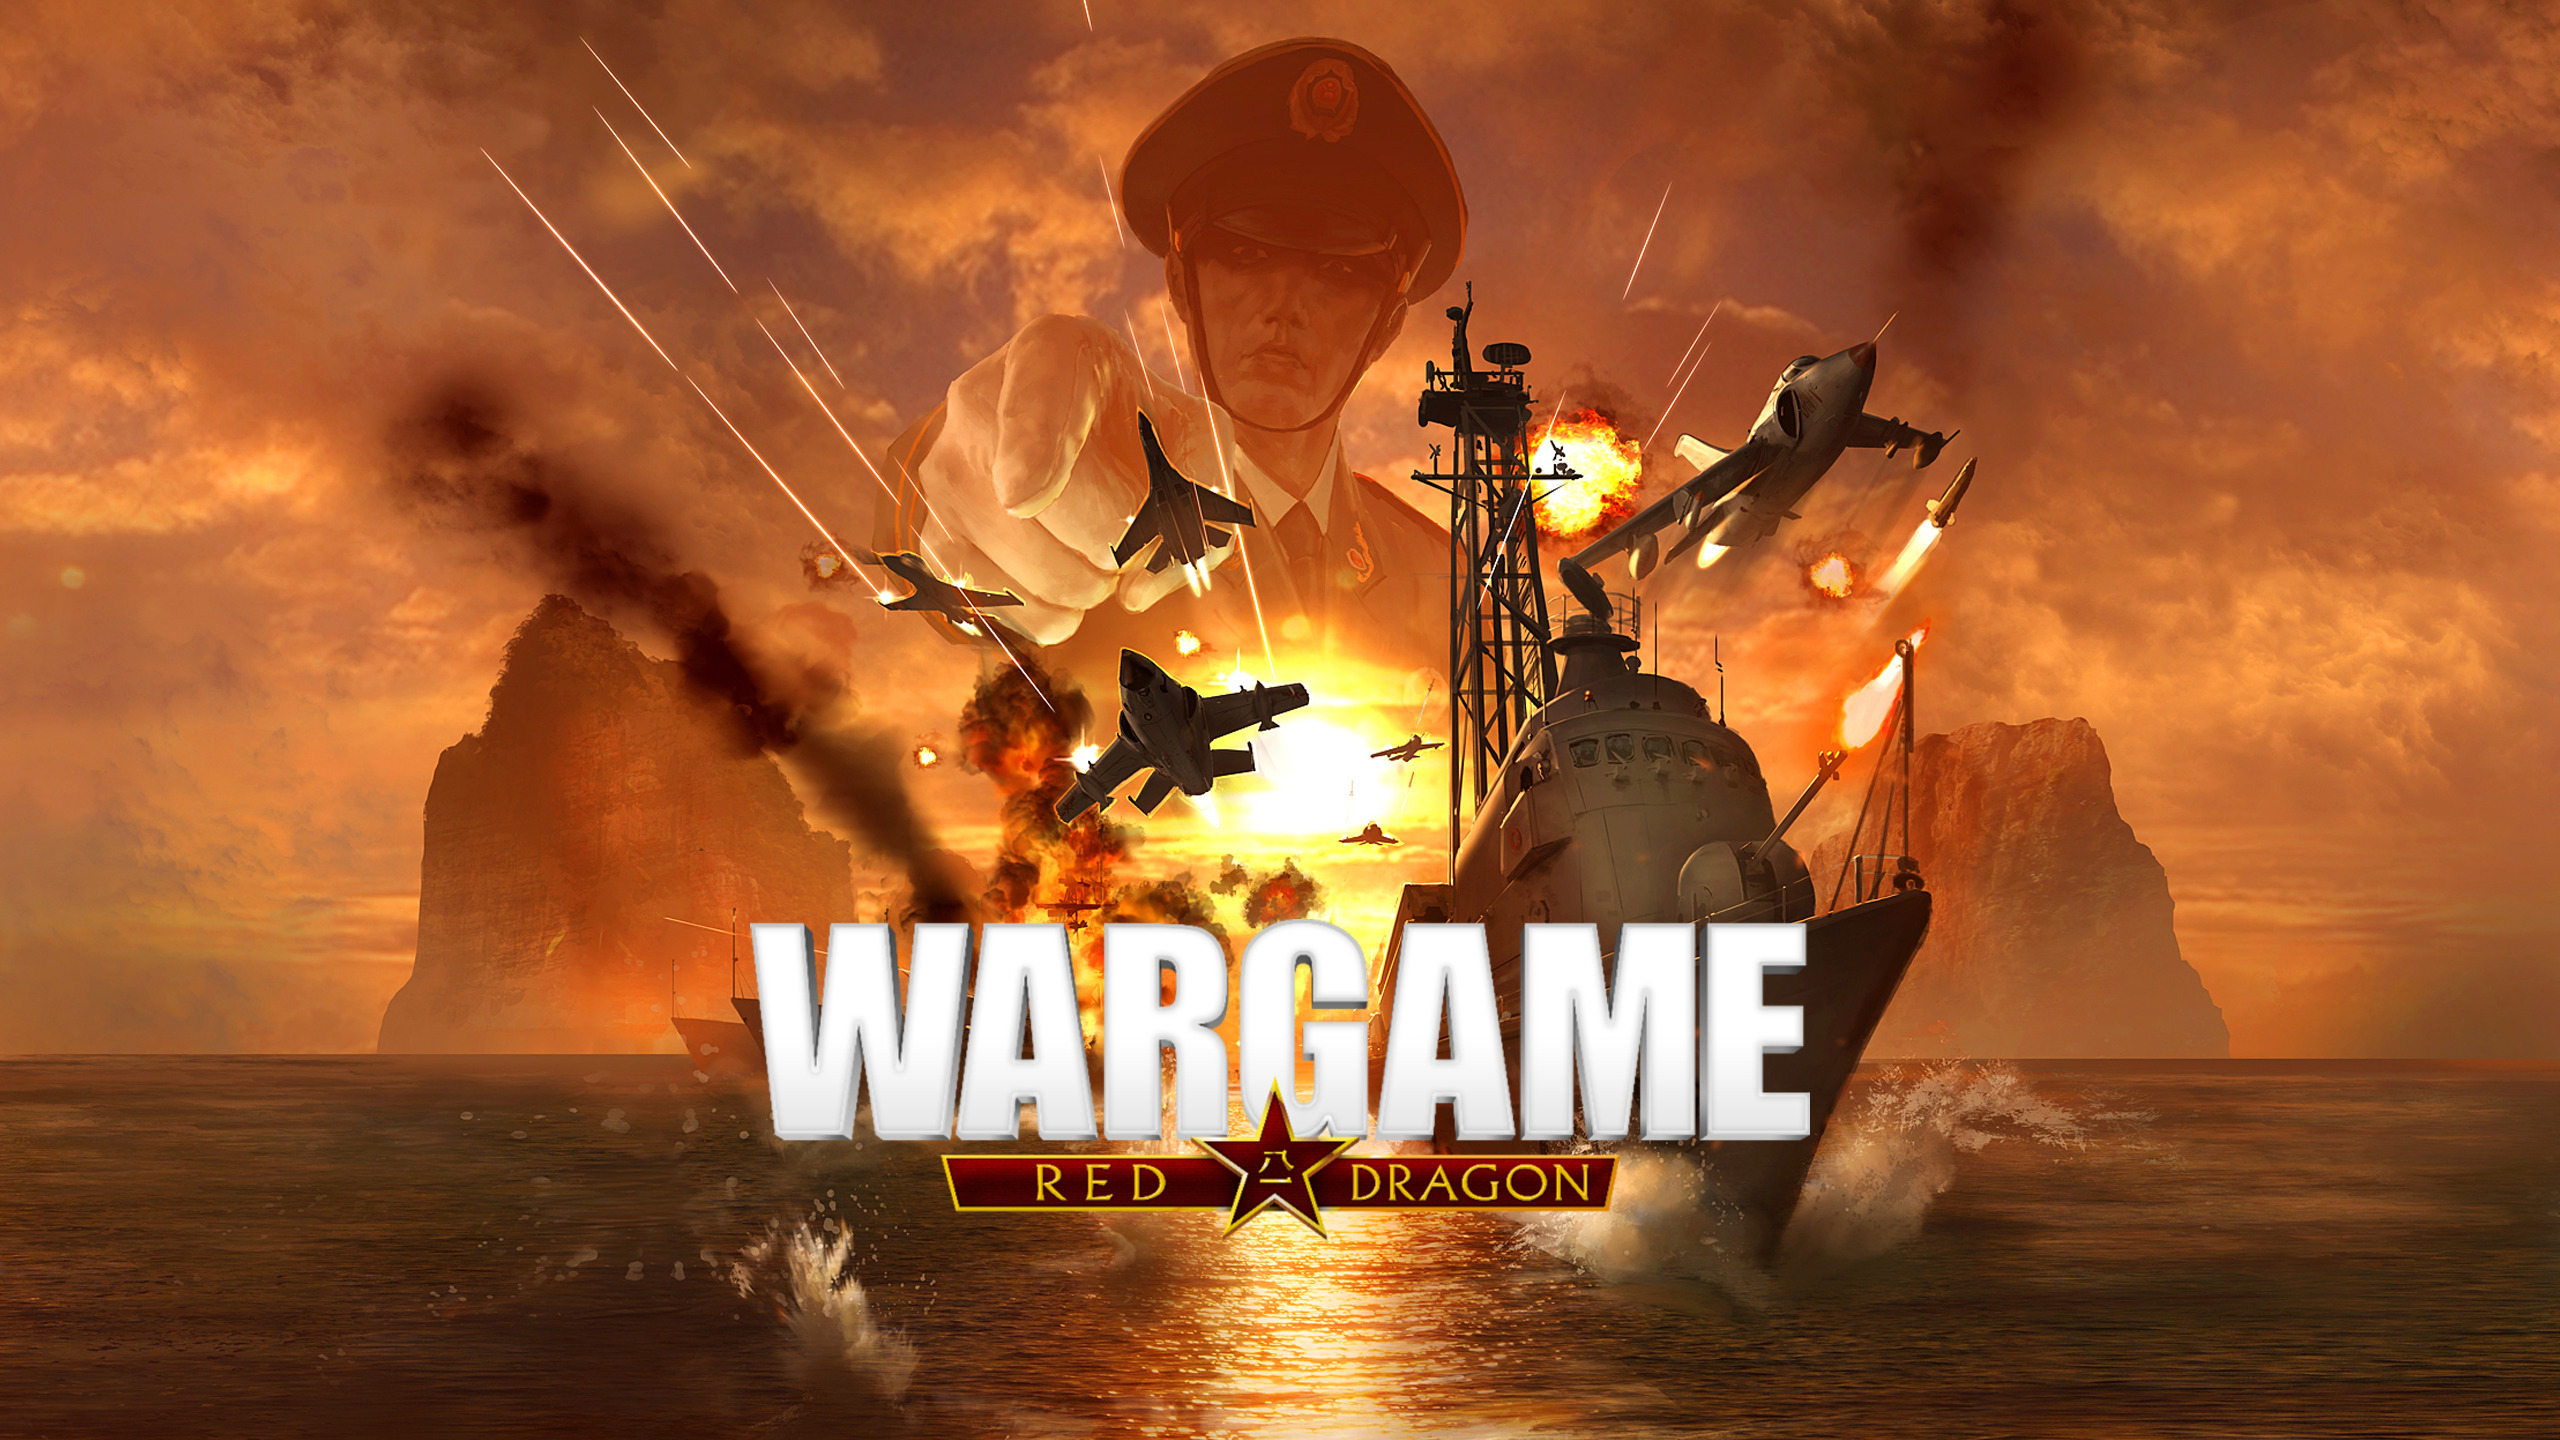 wargame red dragon double nation pack ocean0fgames